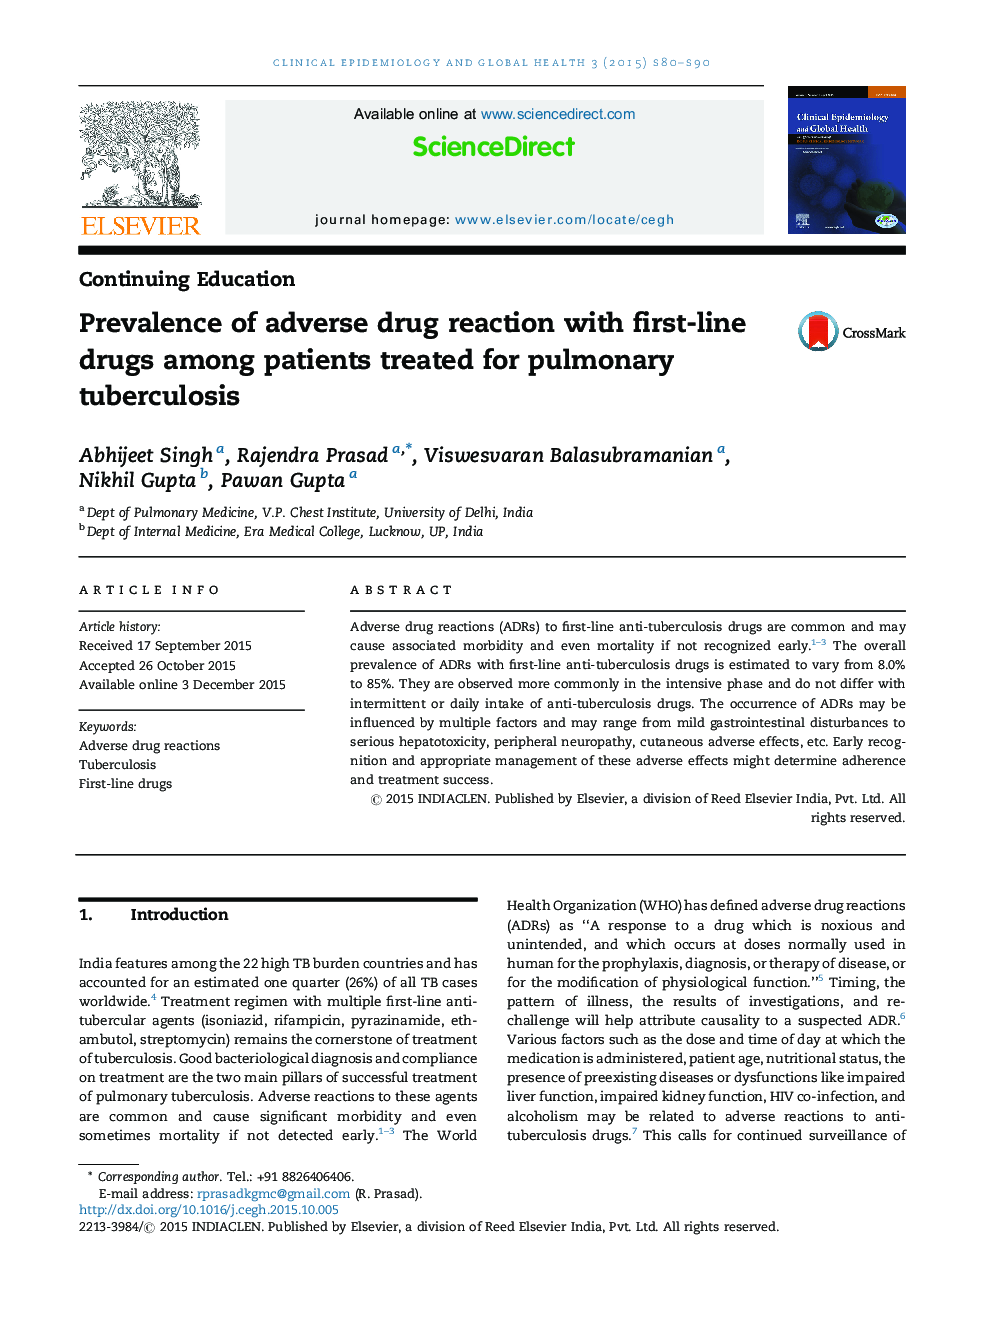 Prevalence of adverse drug reaction with first-line drugs among patients treated for pulmonary tuberculosis